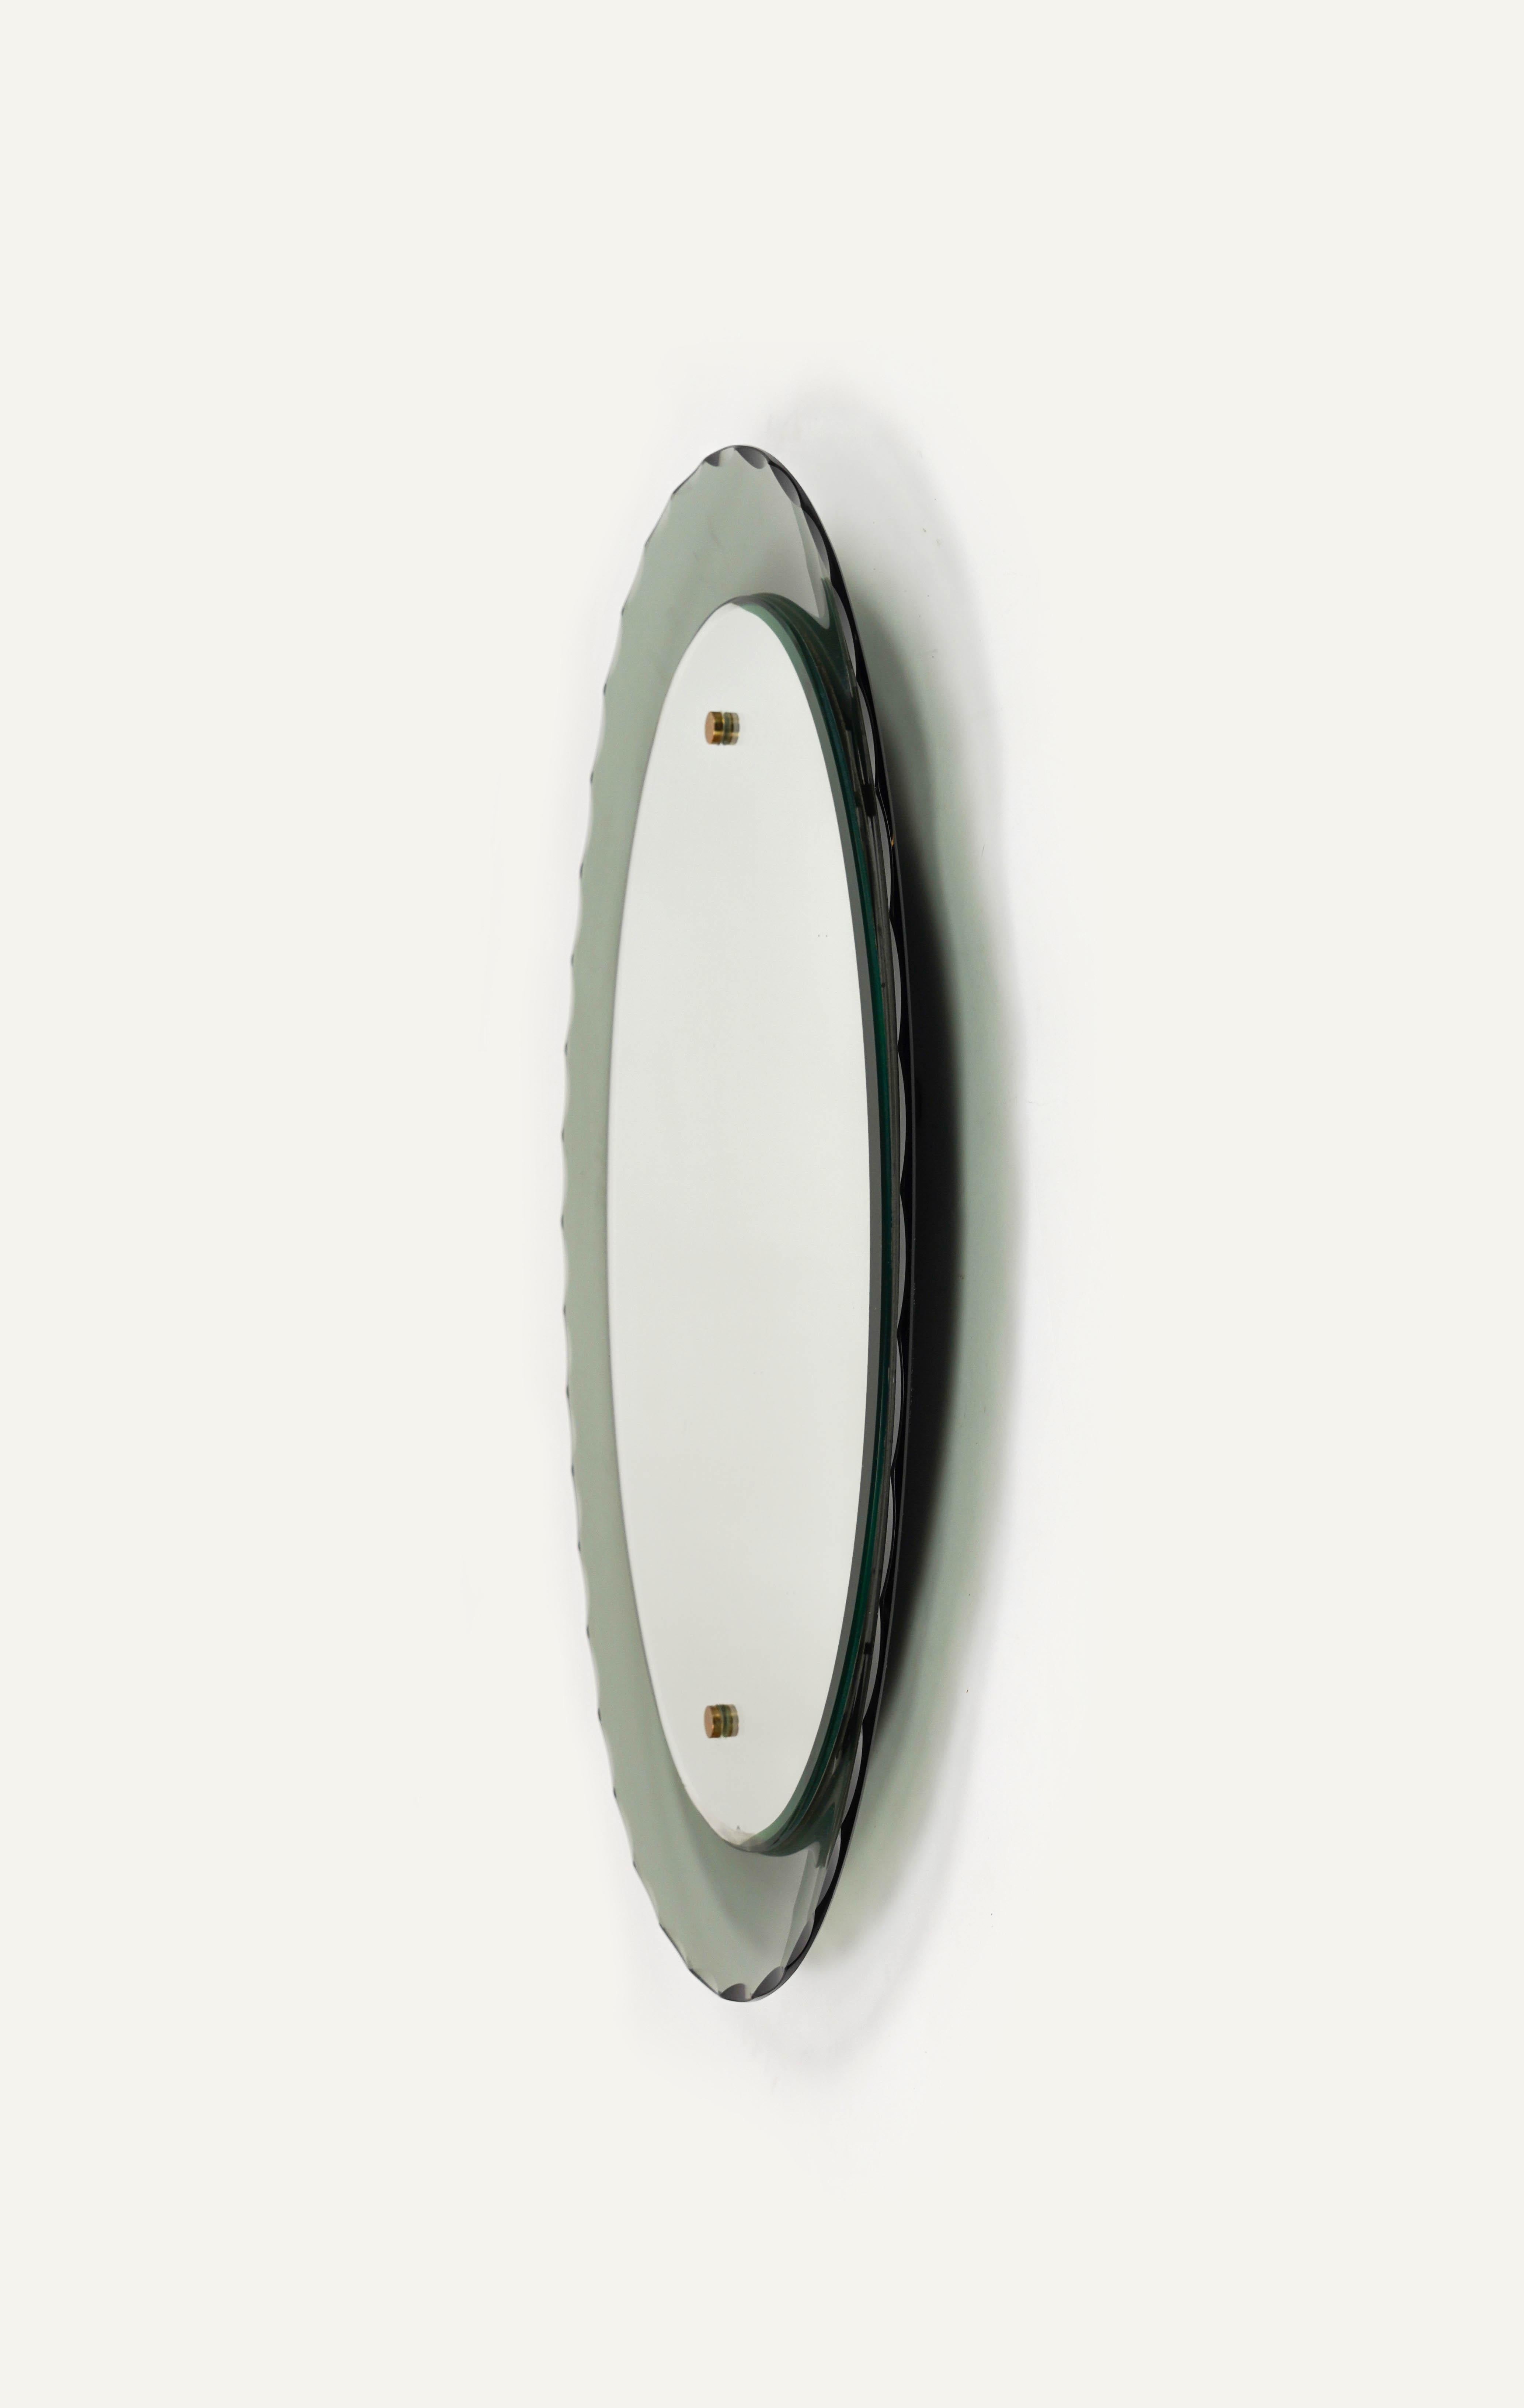 Midcentury Oval Wall Mirror whit Smoked Glass Frame by Cristal Arte, Italy 1960s For Sale 5